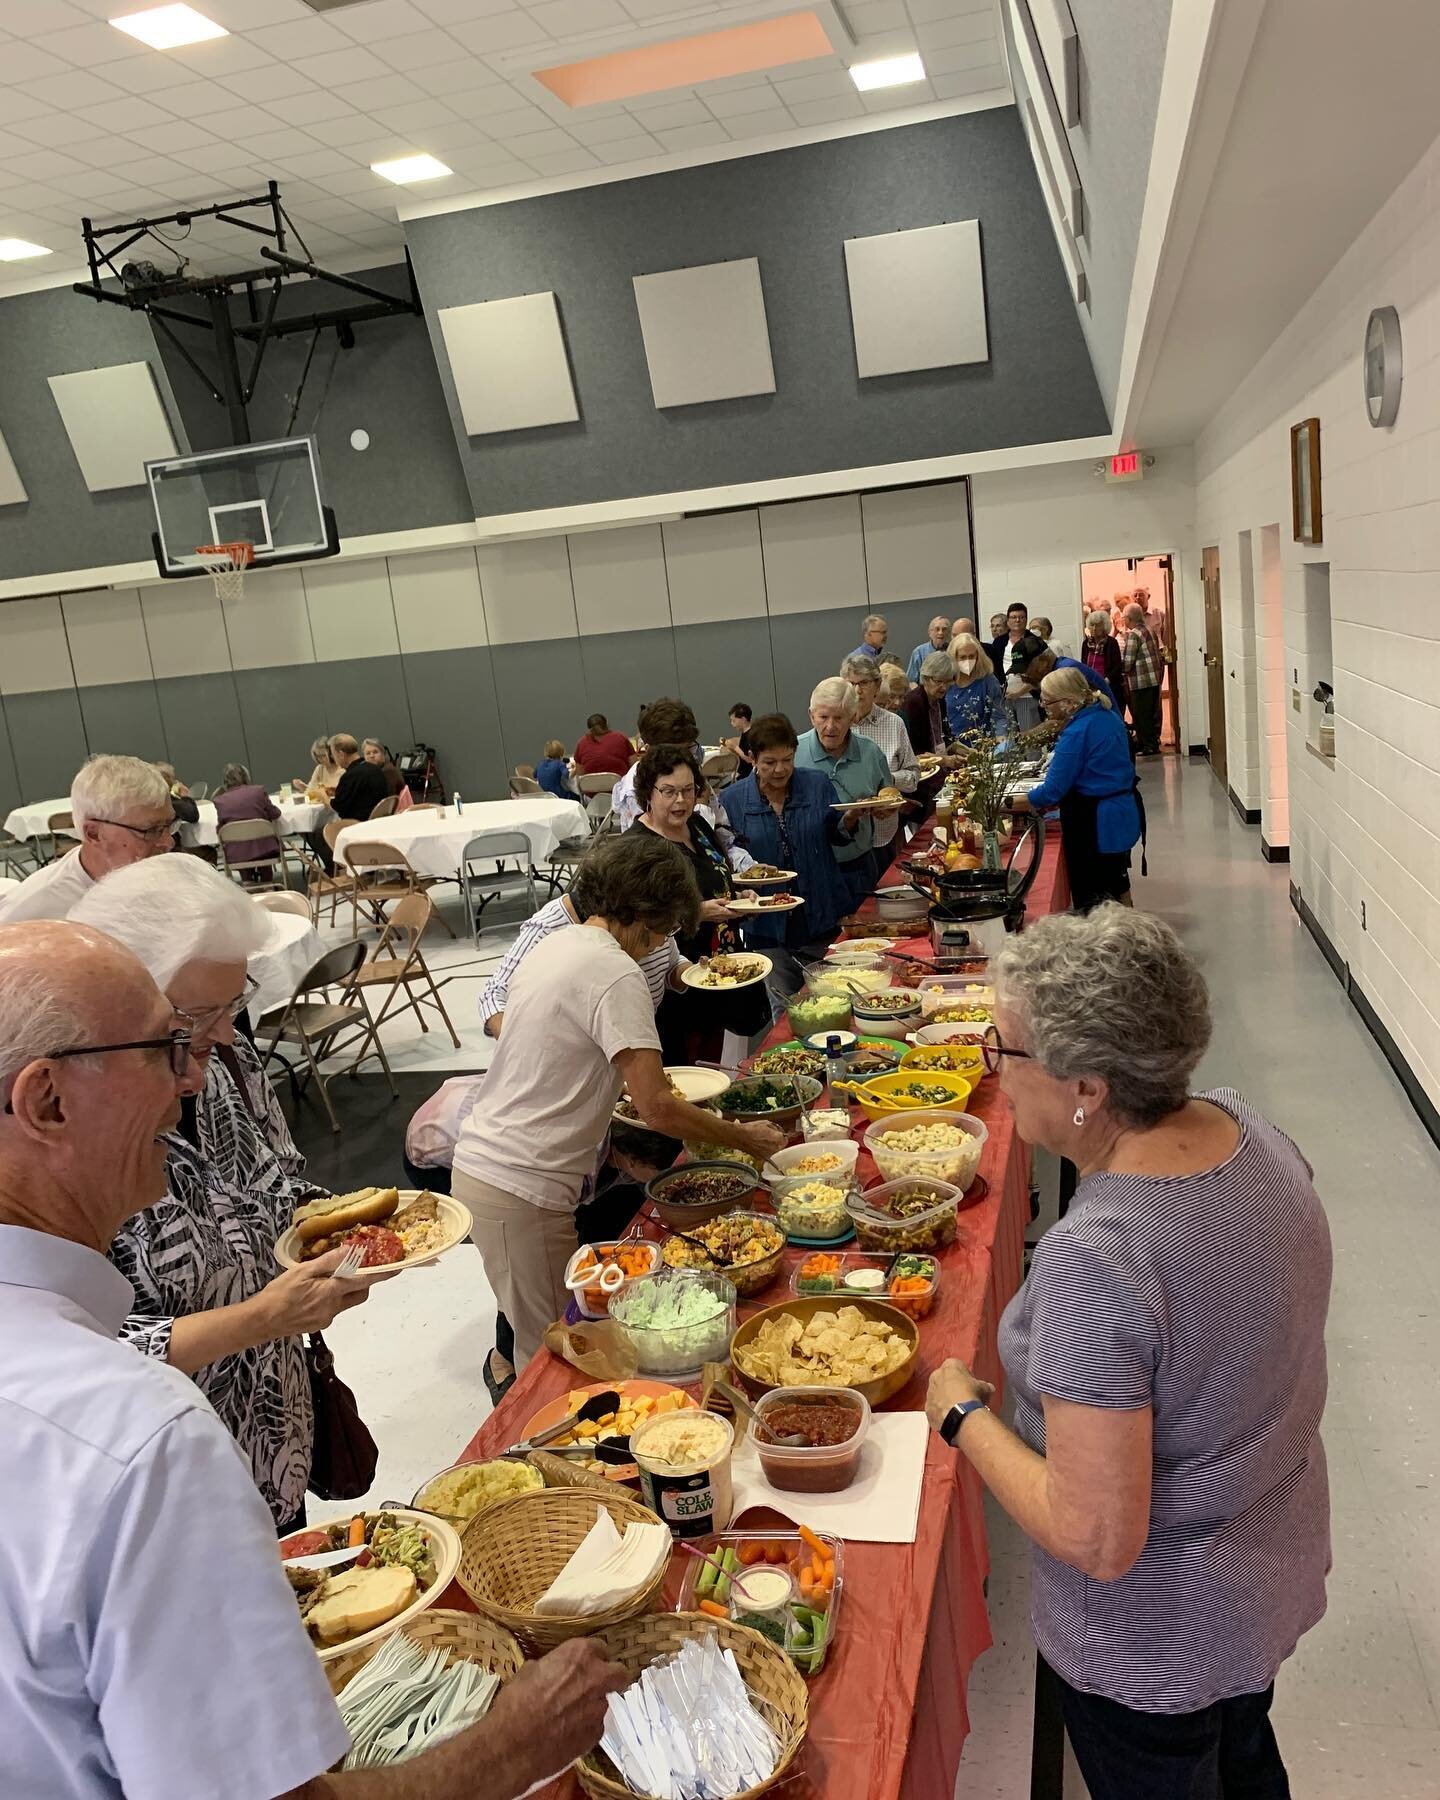 Church picnic Sunday! The rain may have moved us inside - but it was a great time for fellowship, sharing stories, and DElicious foods. Not pictured: every table full of beloved folks having a great time! (I got too invested in my BBQ pork to take mo